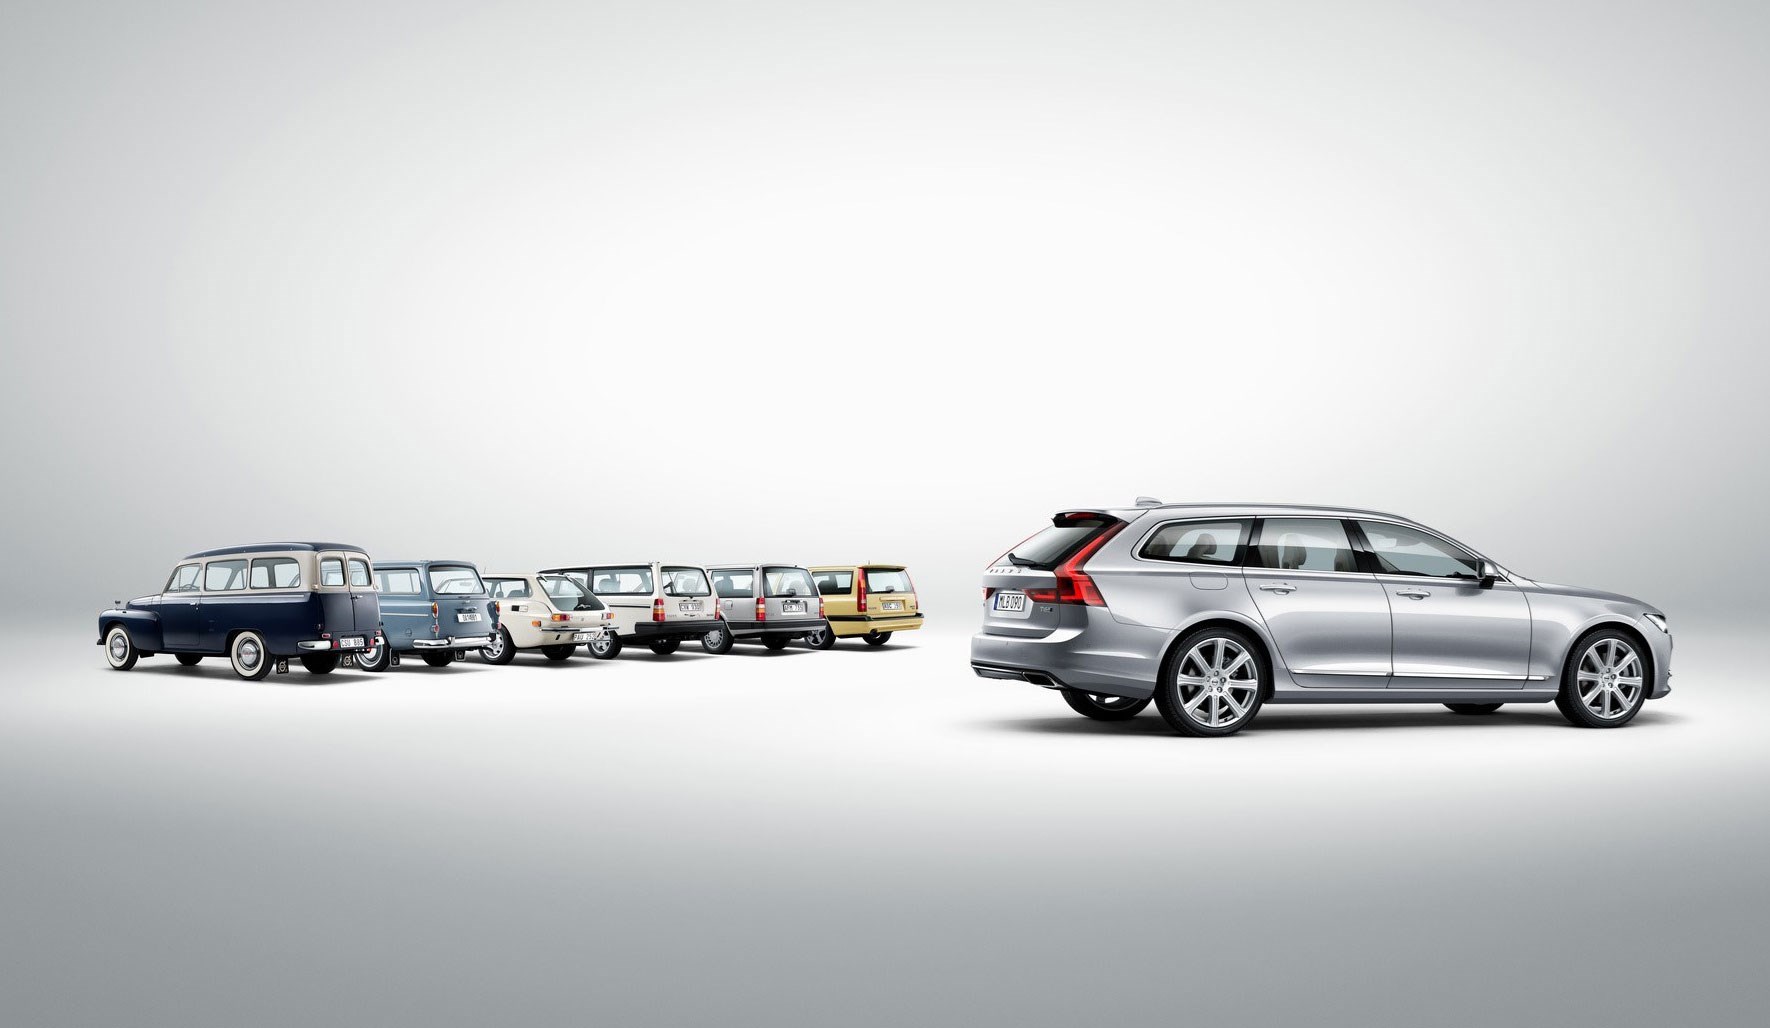 Farewell Volvo estates: why we'll miss boxy Swedish load-luggers